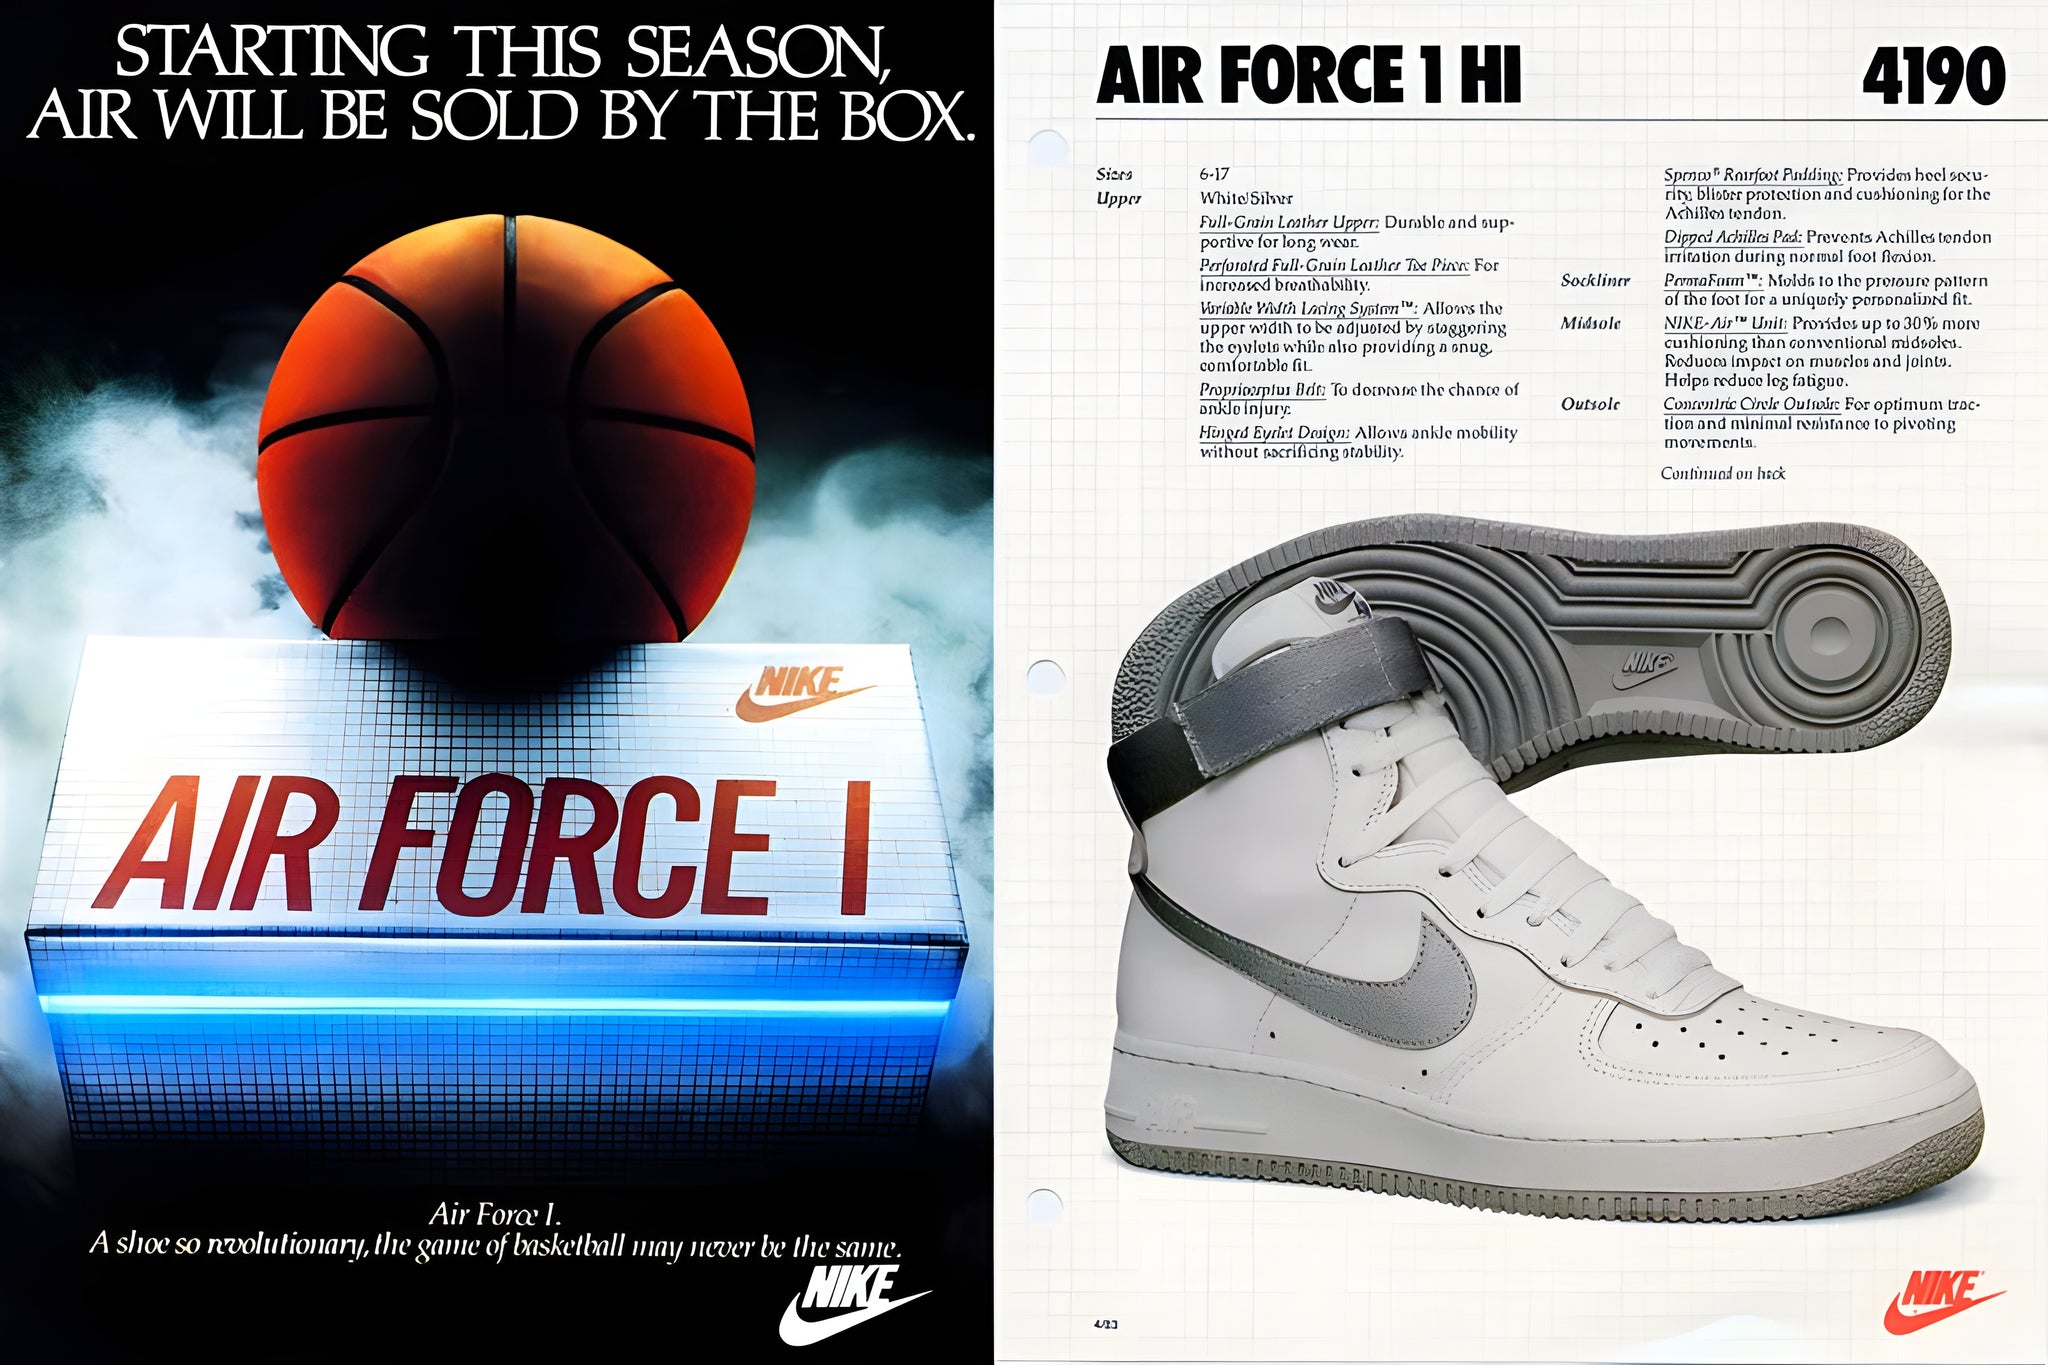 poster with adv and product image of the first model of the Nike Air Force 1 Hi sneaker